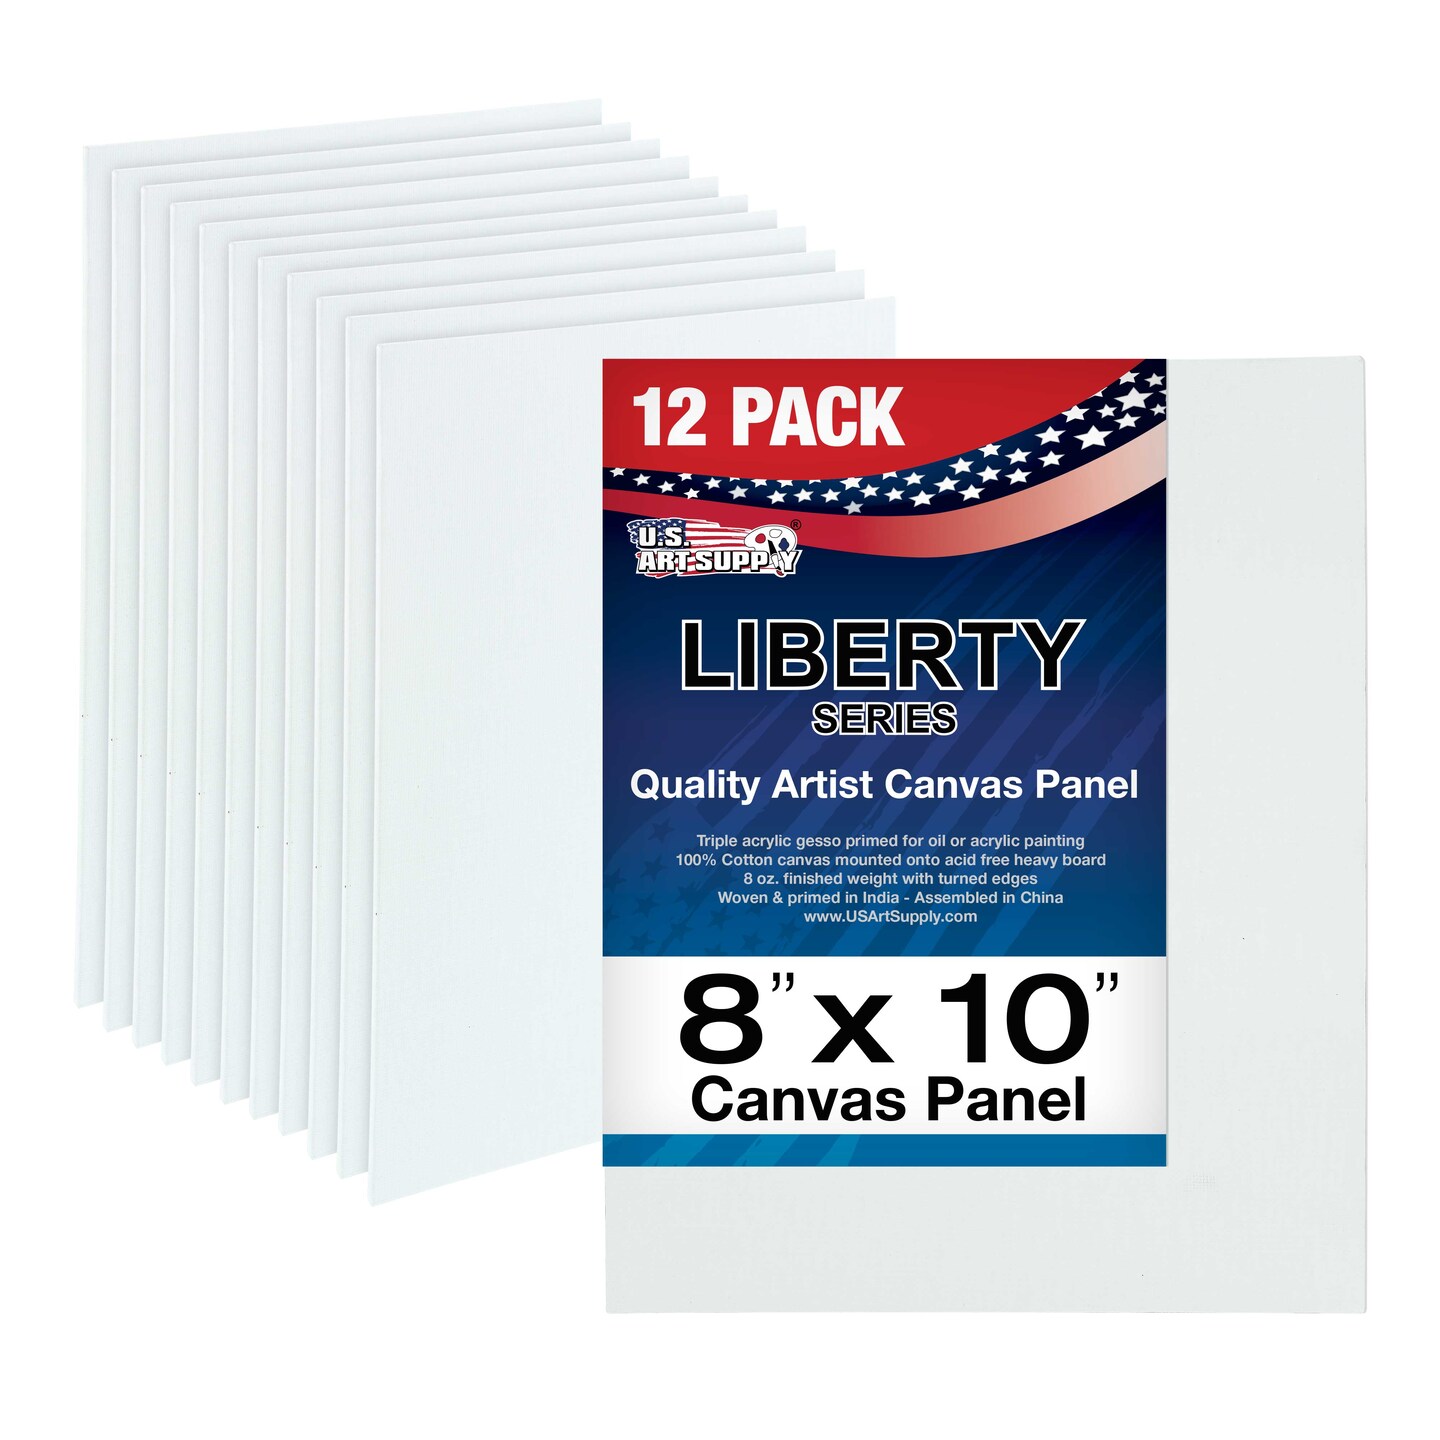 Centurion Universal Acrylic Primed Linen Panels -4x4Canvases for Painting  - 3 Pack of Canvases for Oils, Acrylics, Water-Mixable Oils, and More